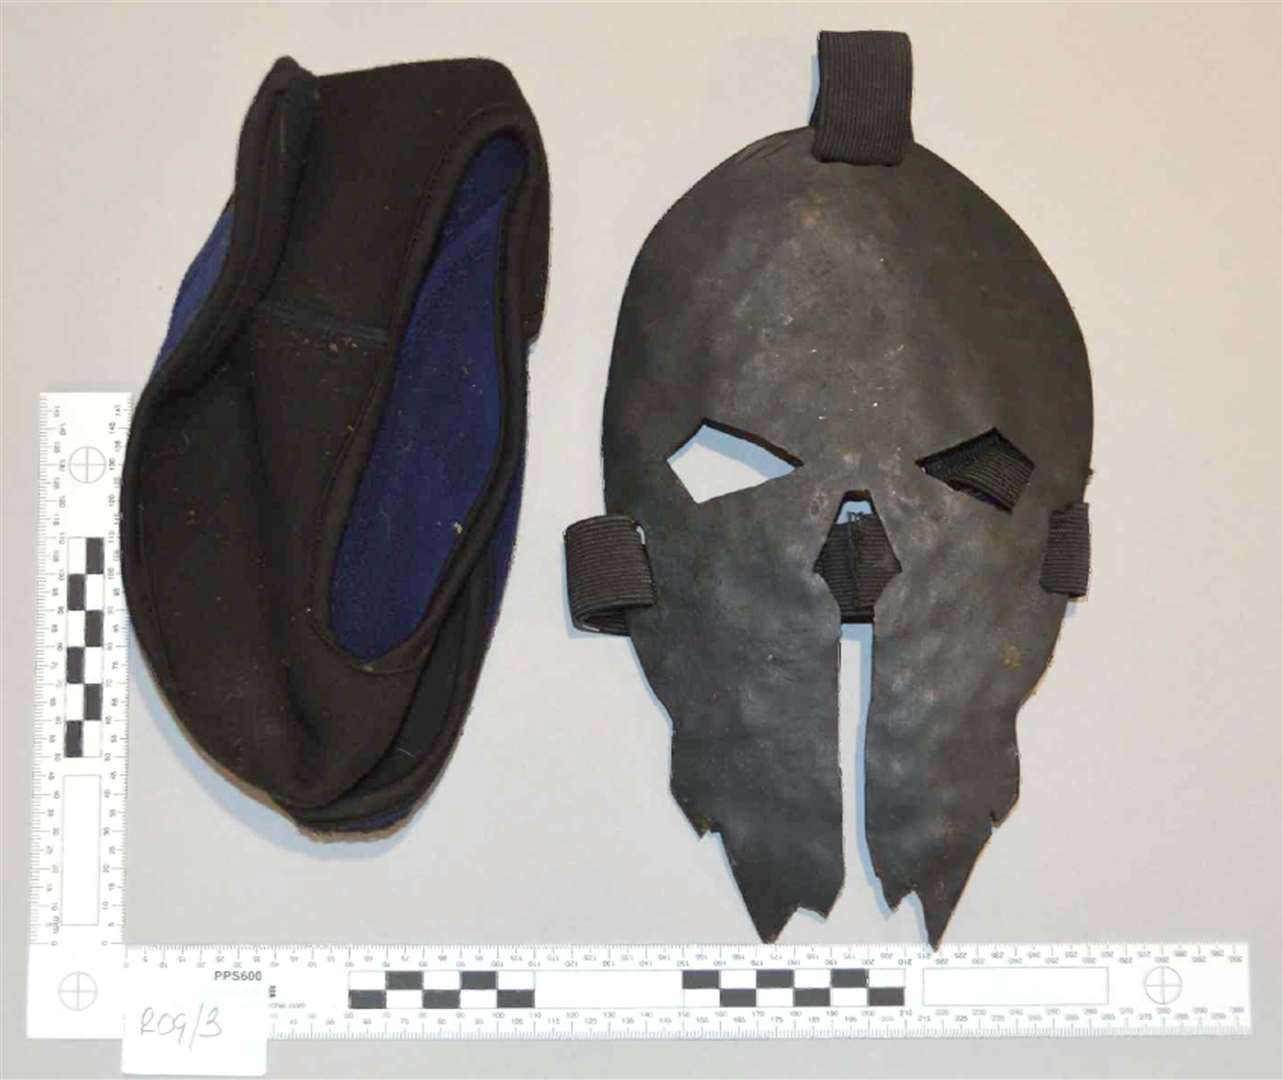 A mask which Jaswant Singh Chail was wearing when arrested (CPS/PA)